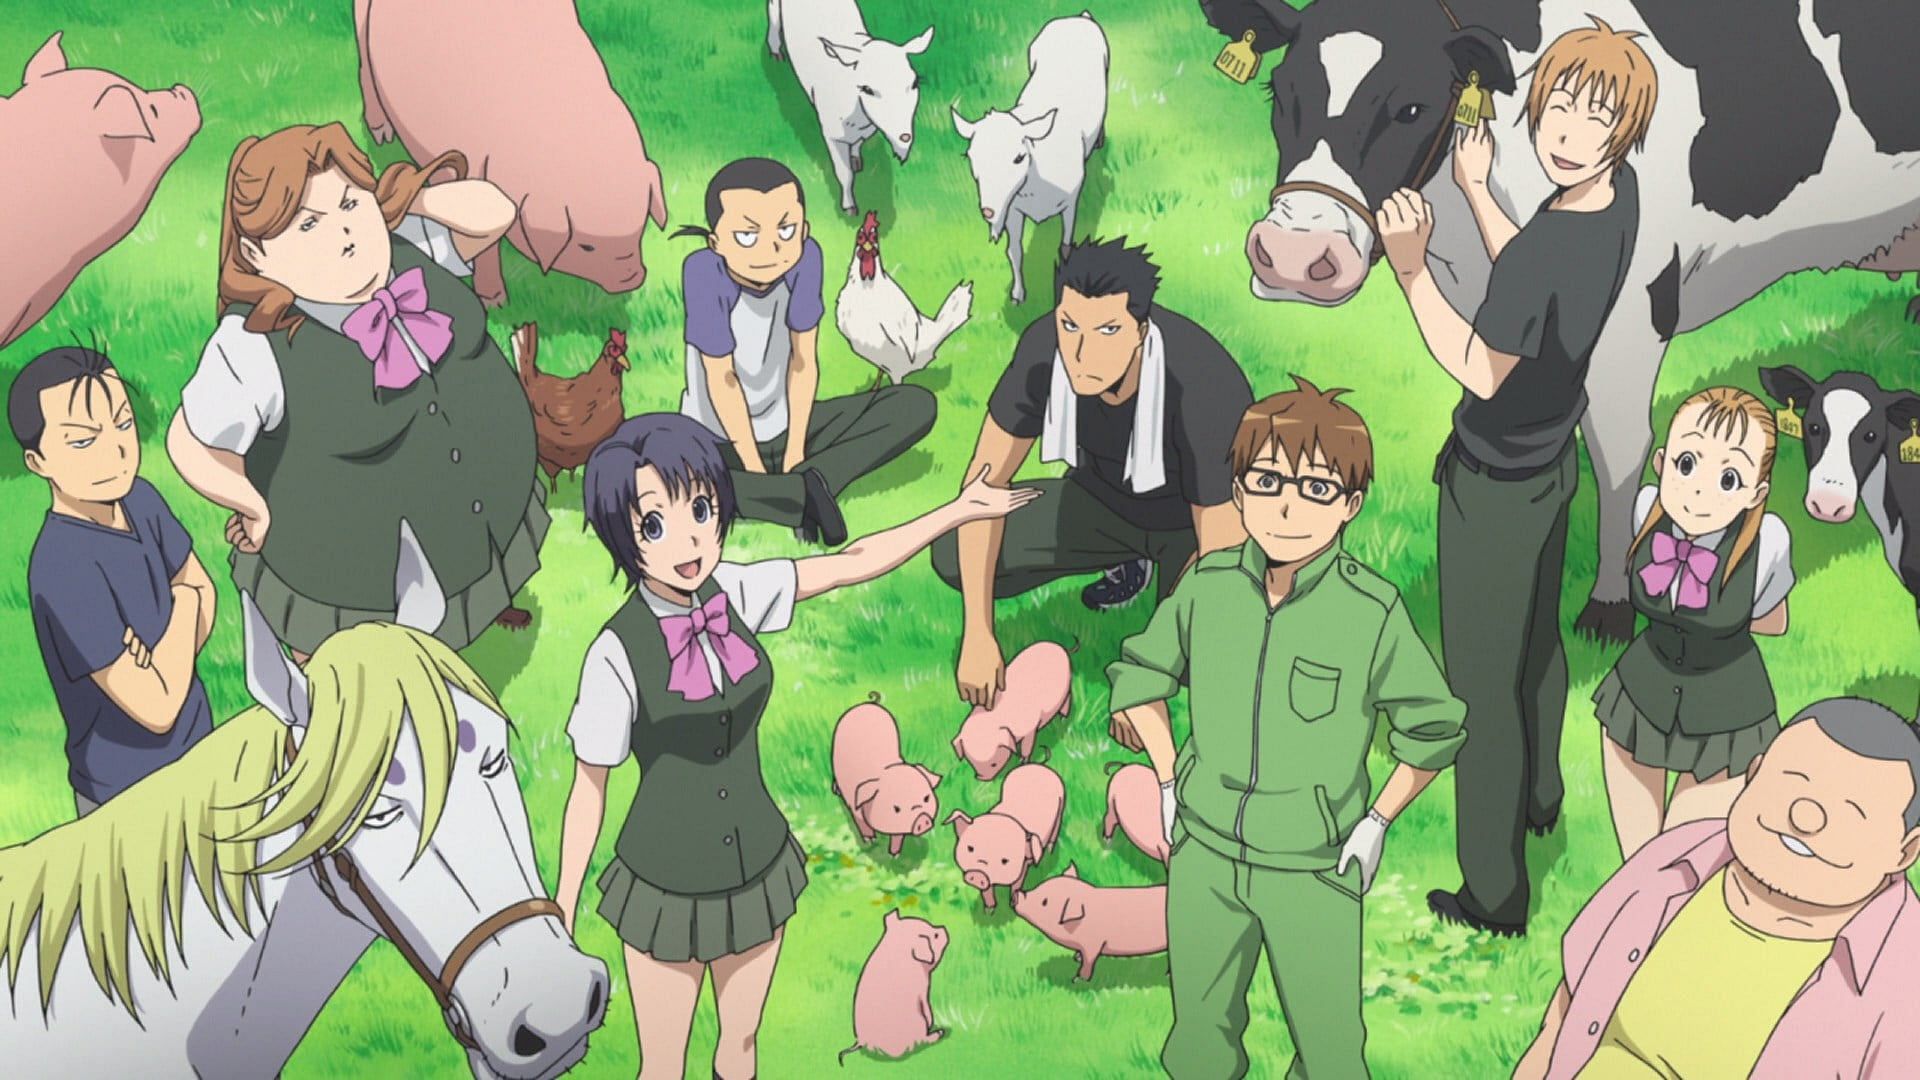 Life can be cruel but not without hope Review of Silver Spoon  Cannes  anime review blog